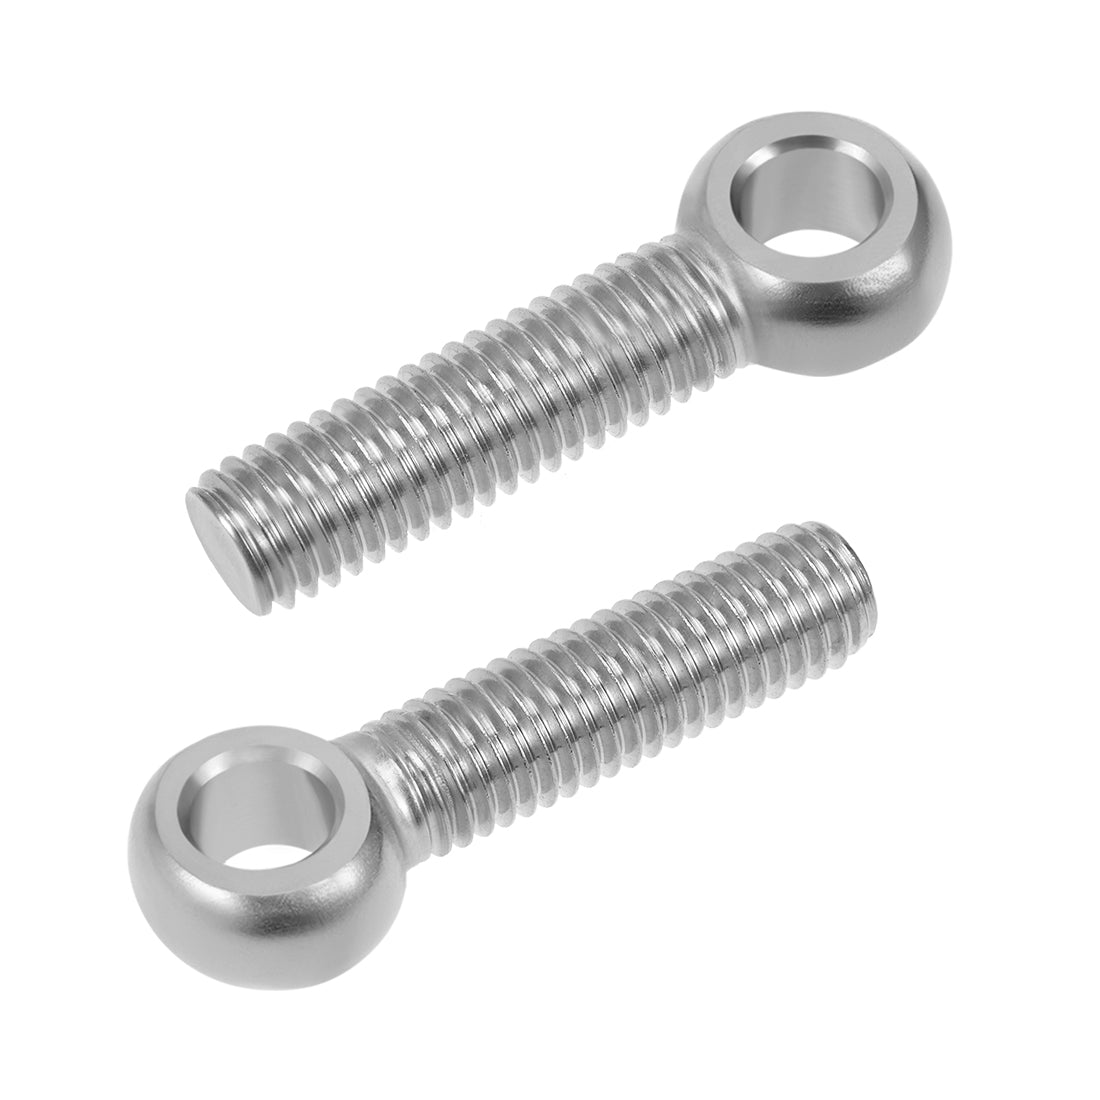 uxcell Uxcell M10 x 40mm Machinery Shoulder Swing Lifting Eye Bolt 304 Stainless Steel Metric Thread 2pcs